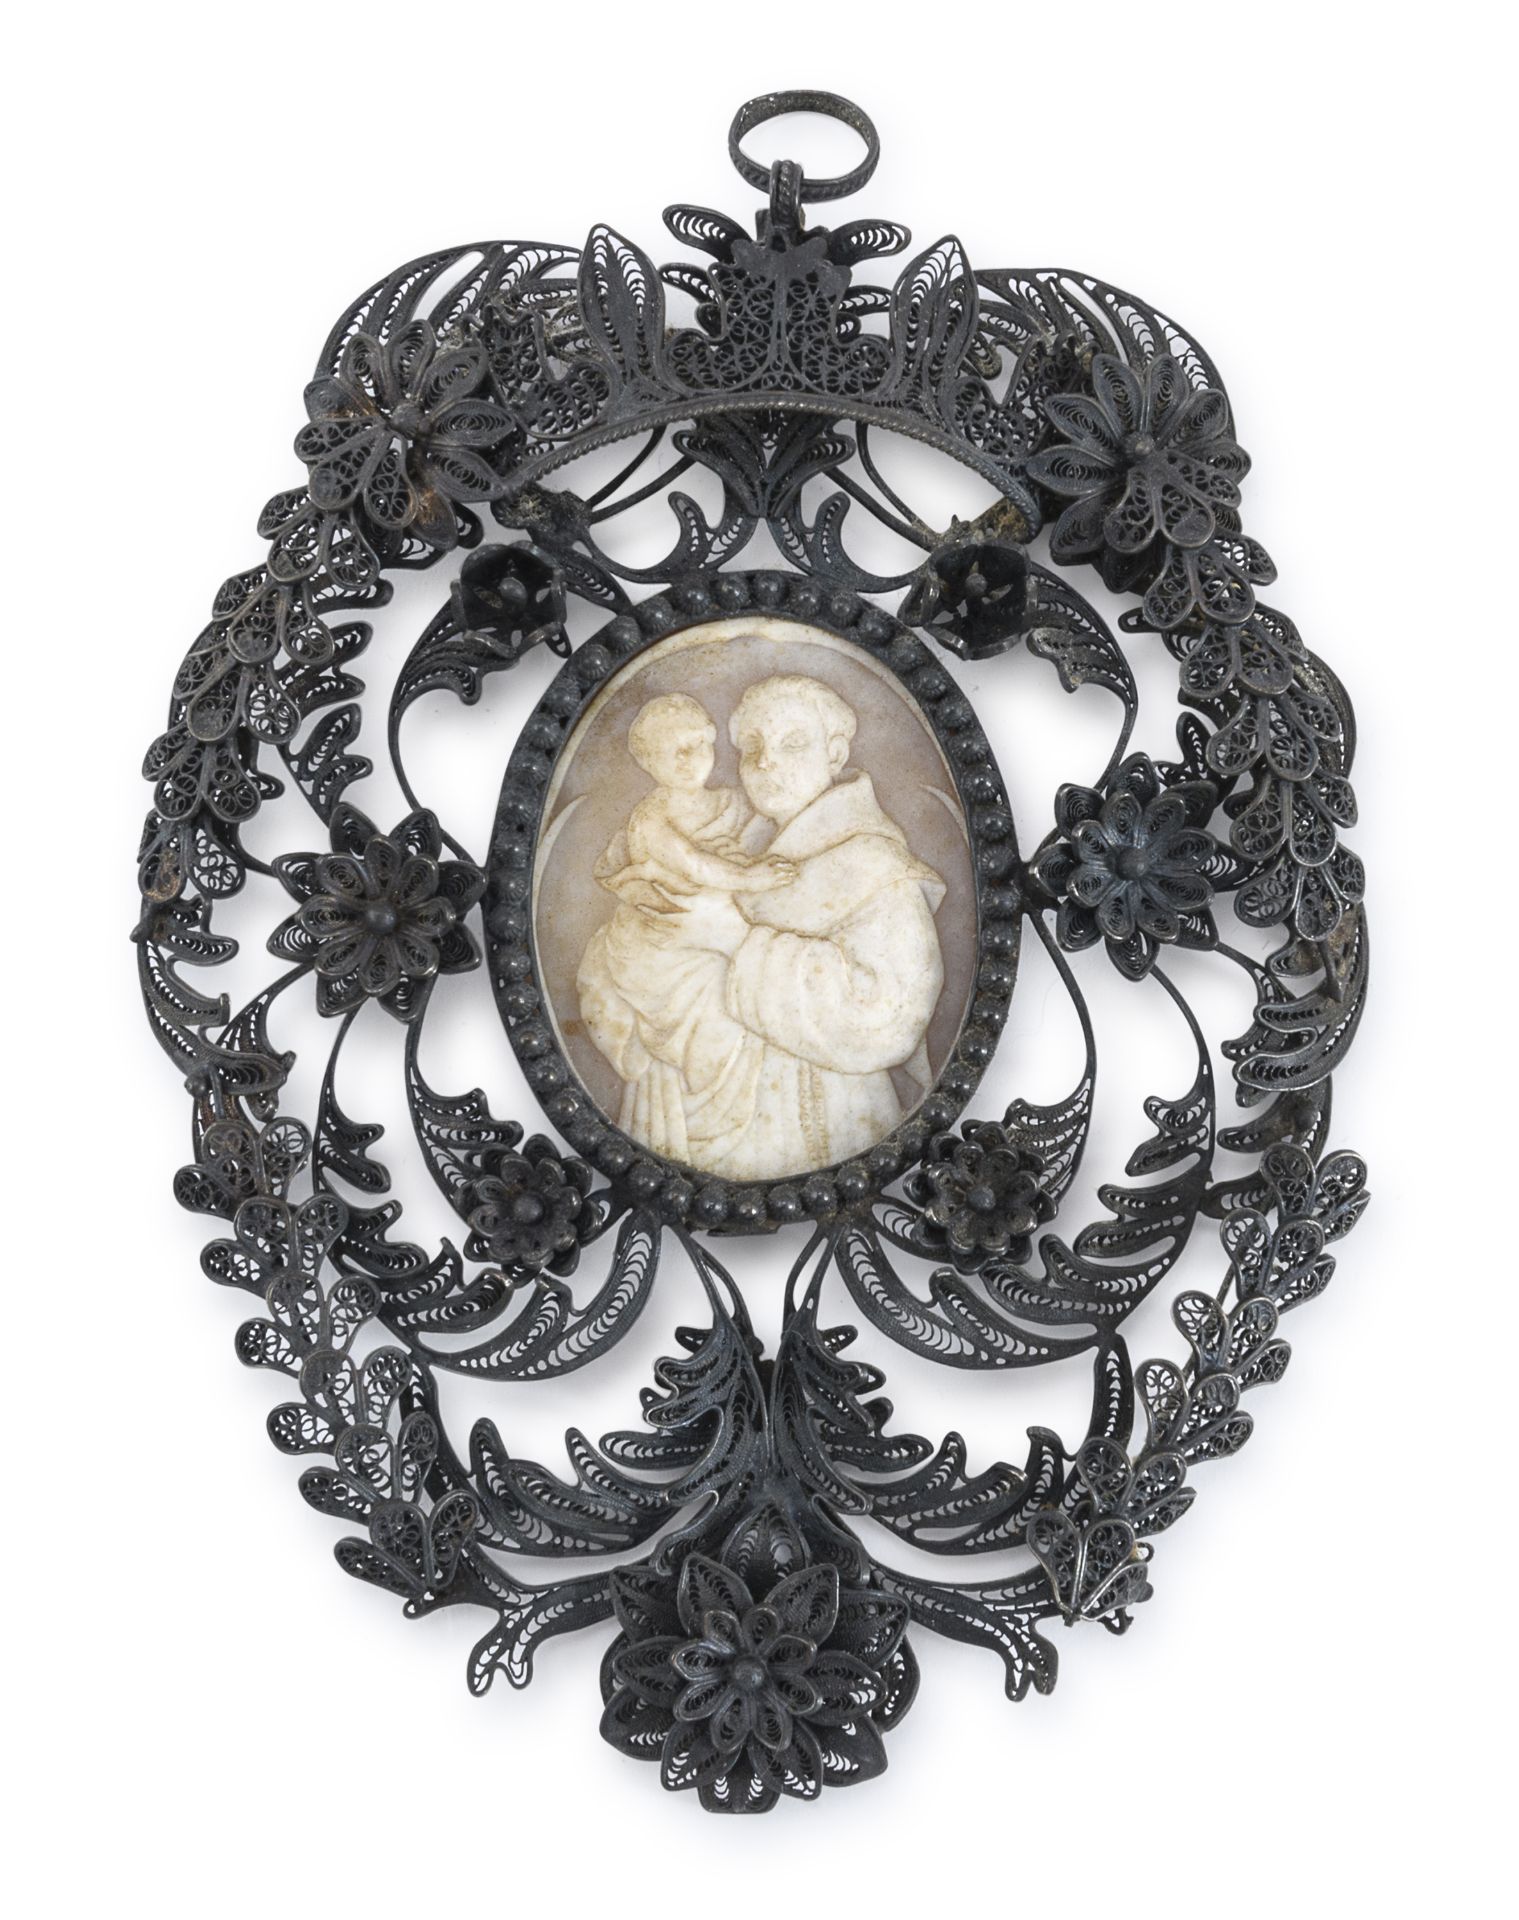 SMALL IVORY BAS-RELIEF 18th CENTURY